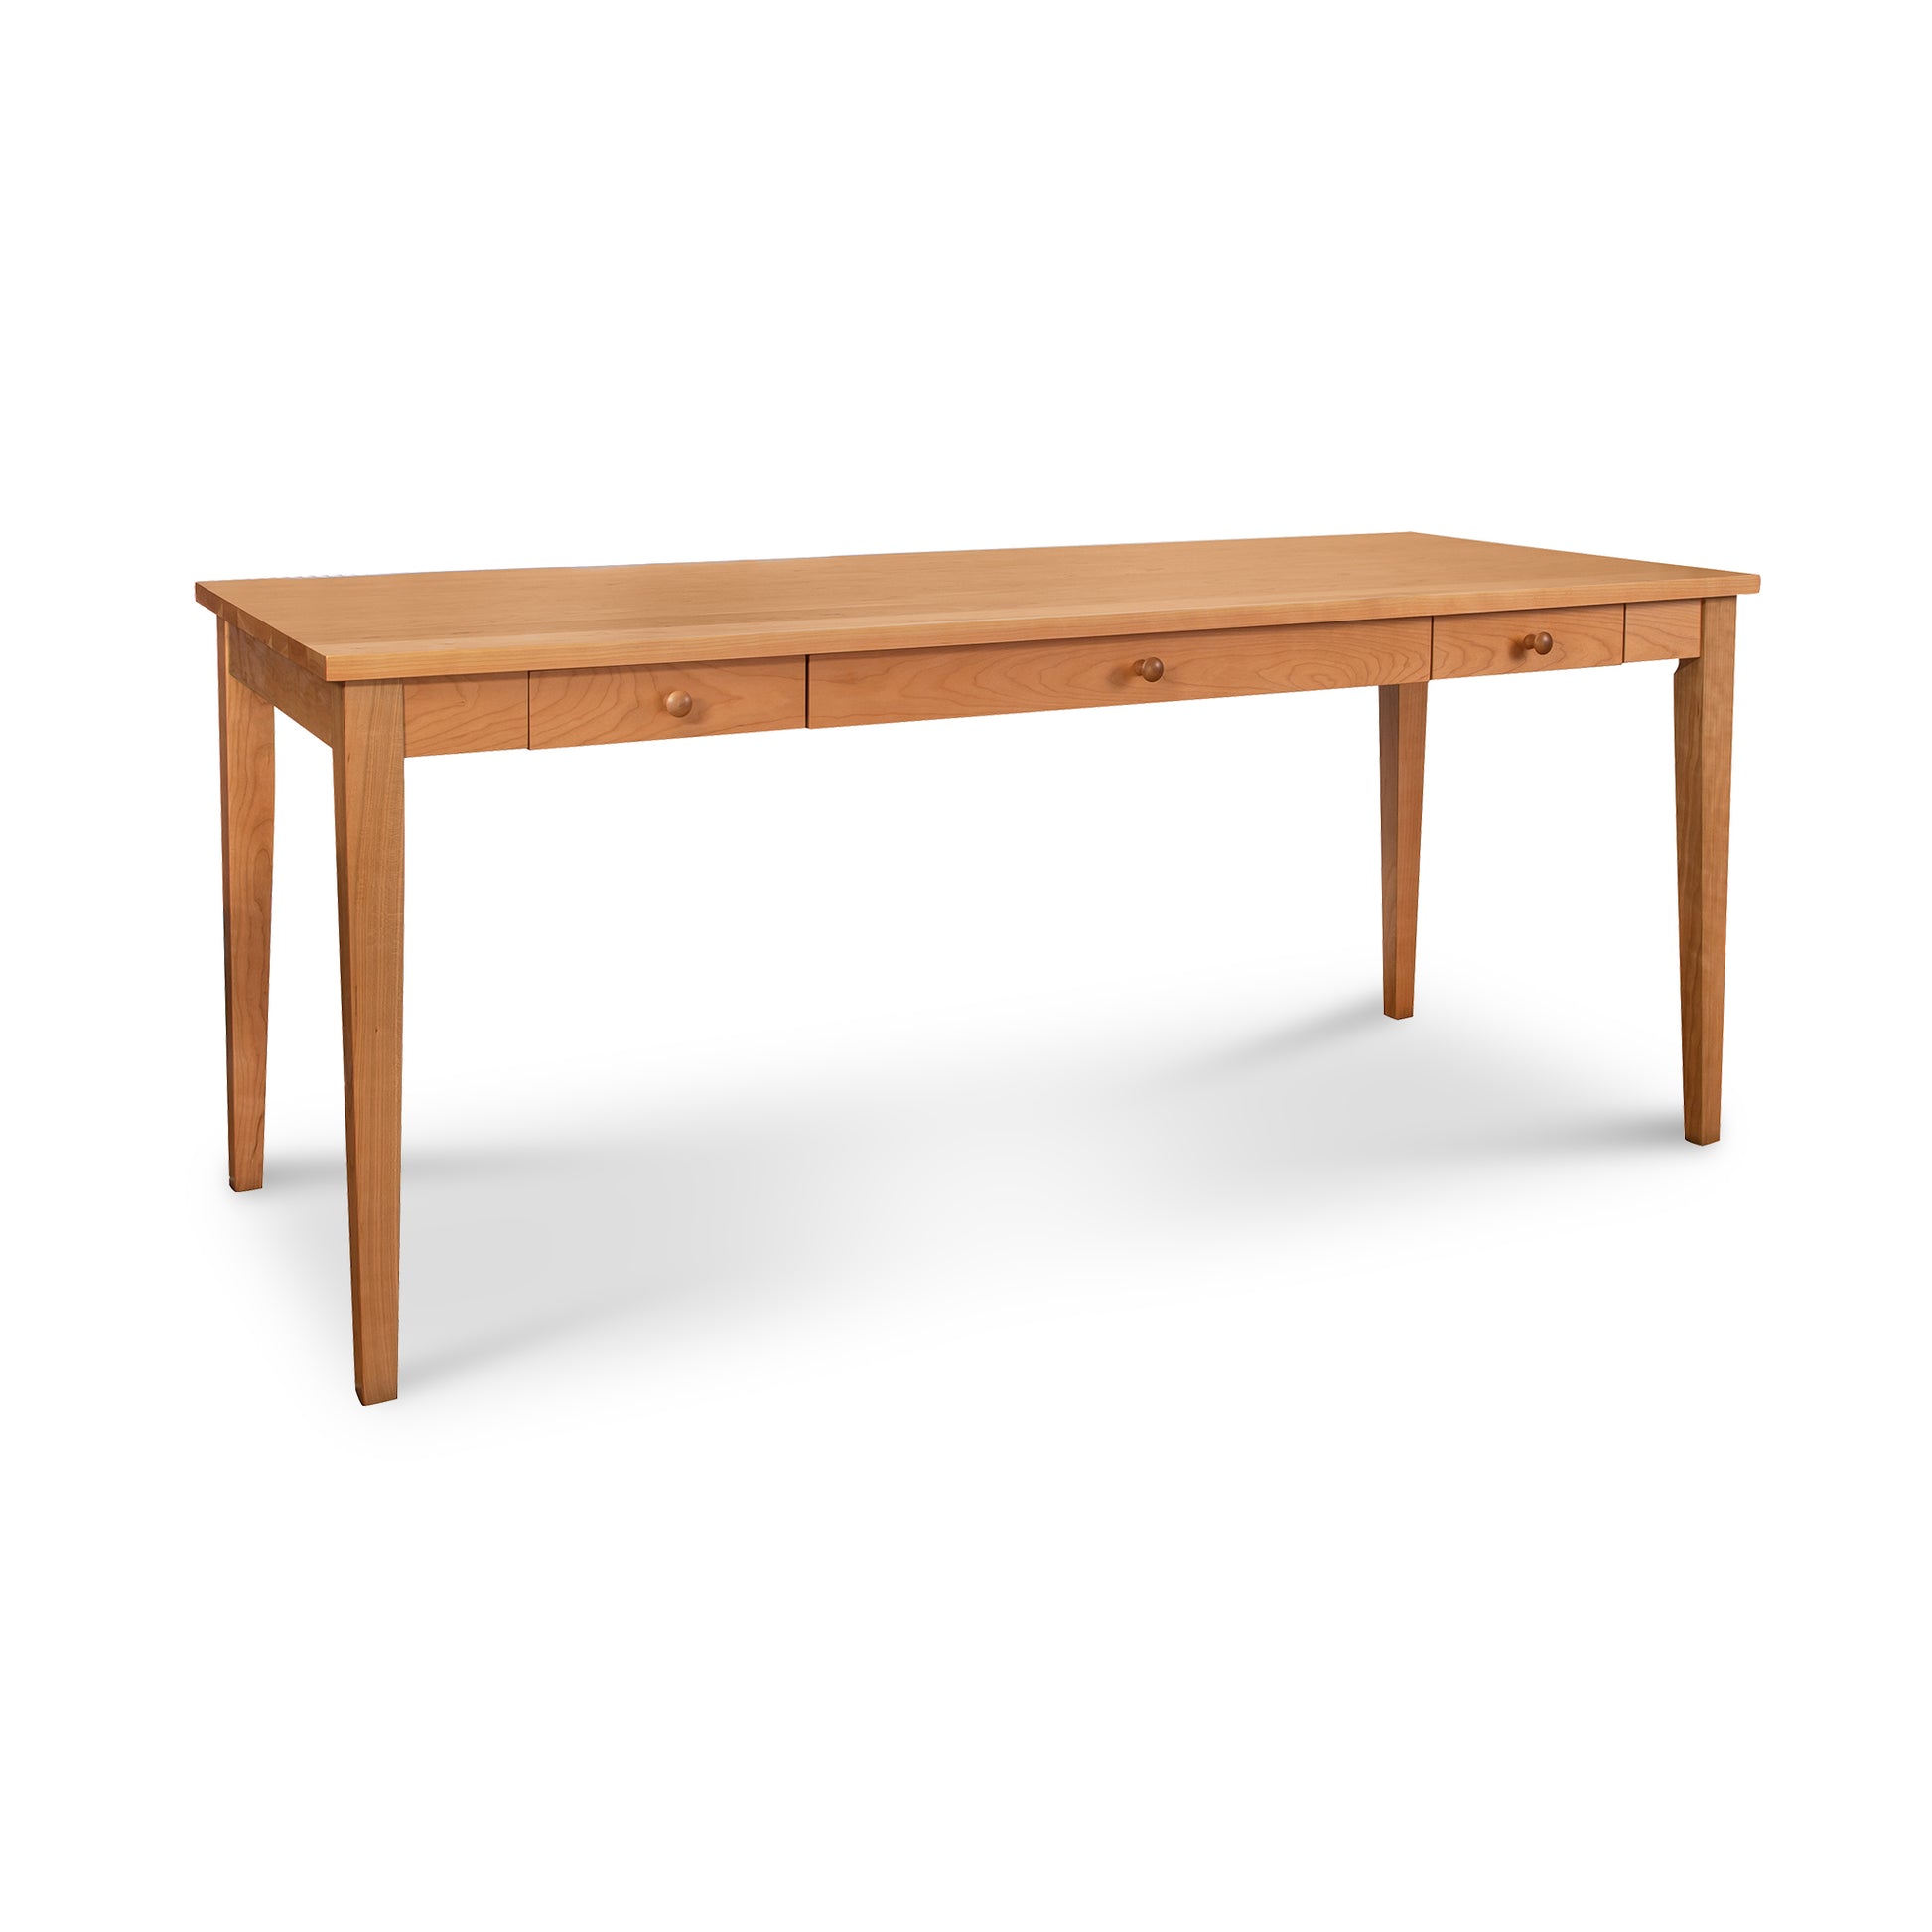 A Classic Shaker Writing Desk made by Lyndon Furniture, an eco-friendly desk with solid wood and two drawers.